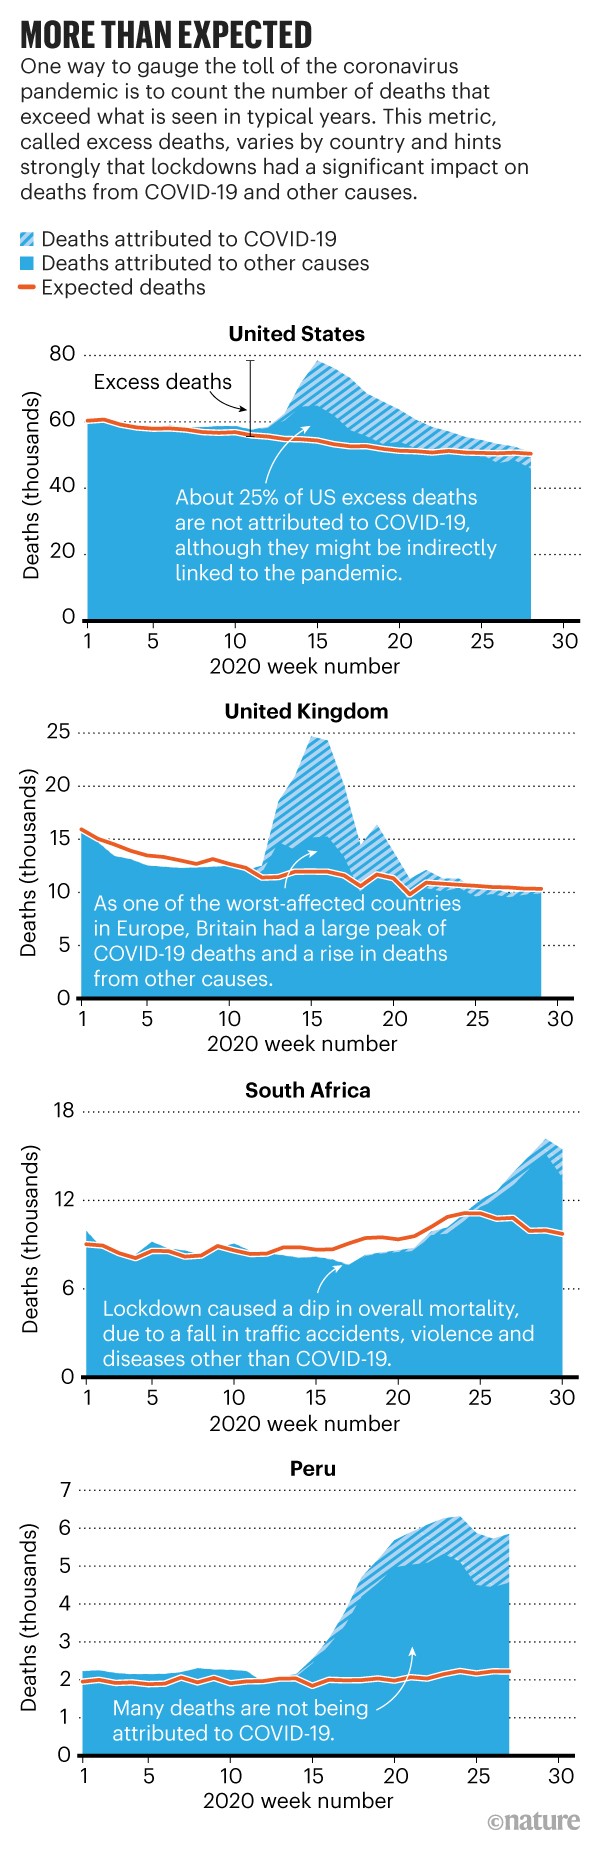 Infographic: More than expected. Four charts comparing the expected and actual deaths rates in four large countries.